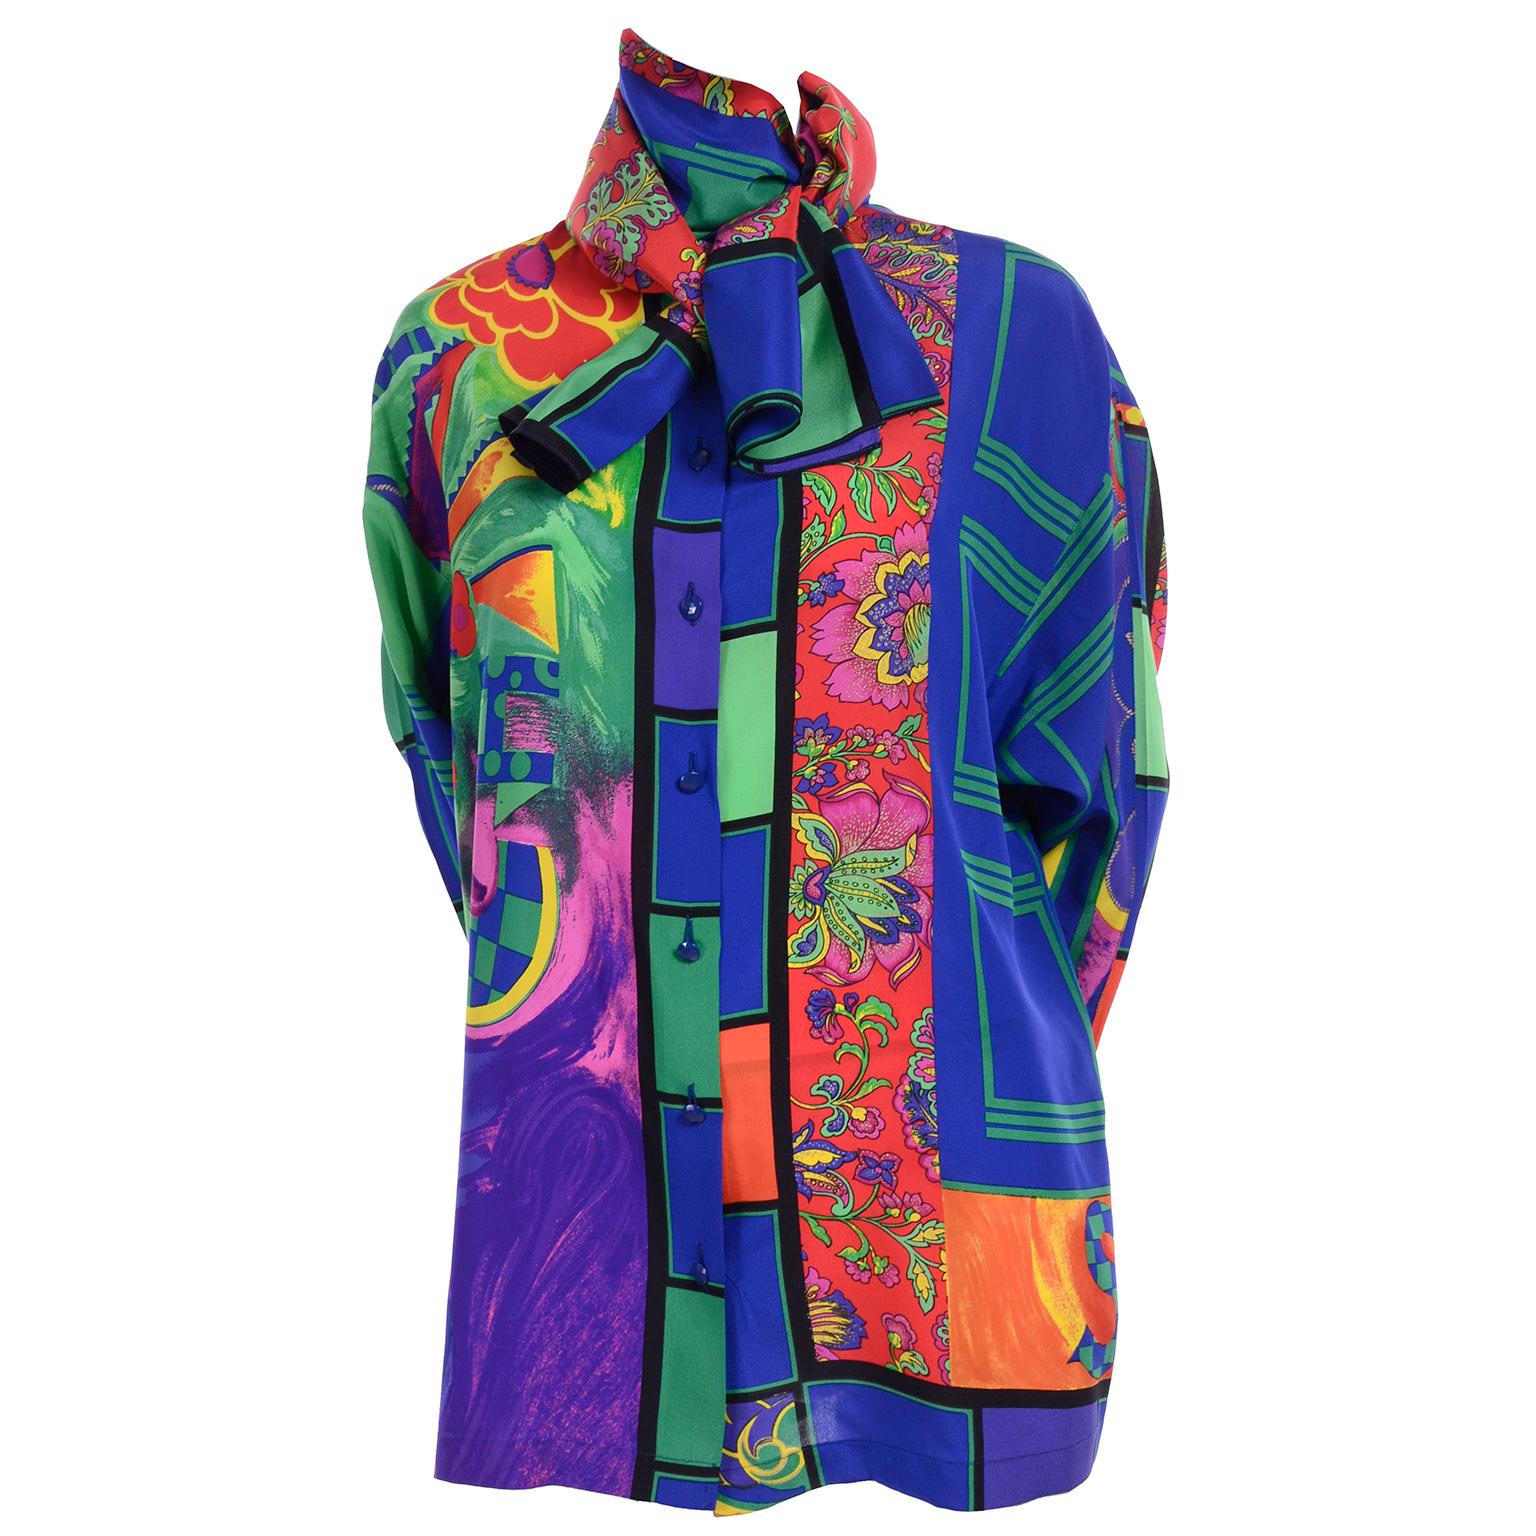 Gianni Versace Early 1990s Bright Colorful Vintage Silk Print Shirt & Huge Scarf For Sale 2